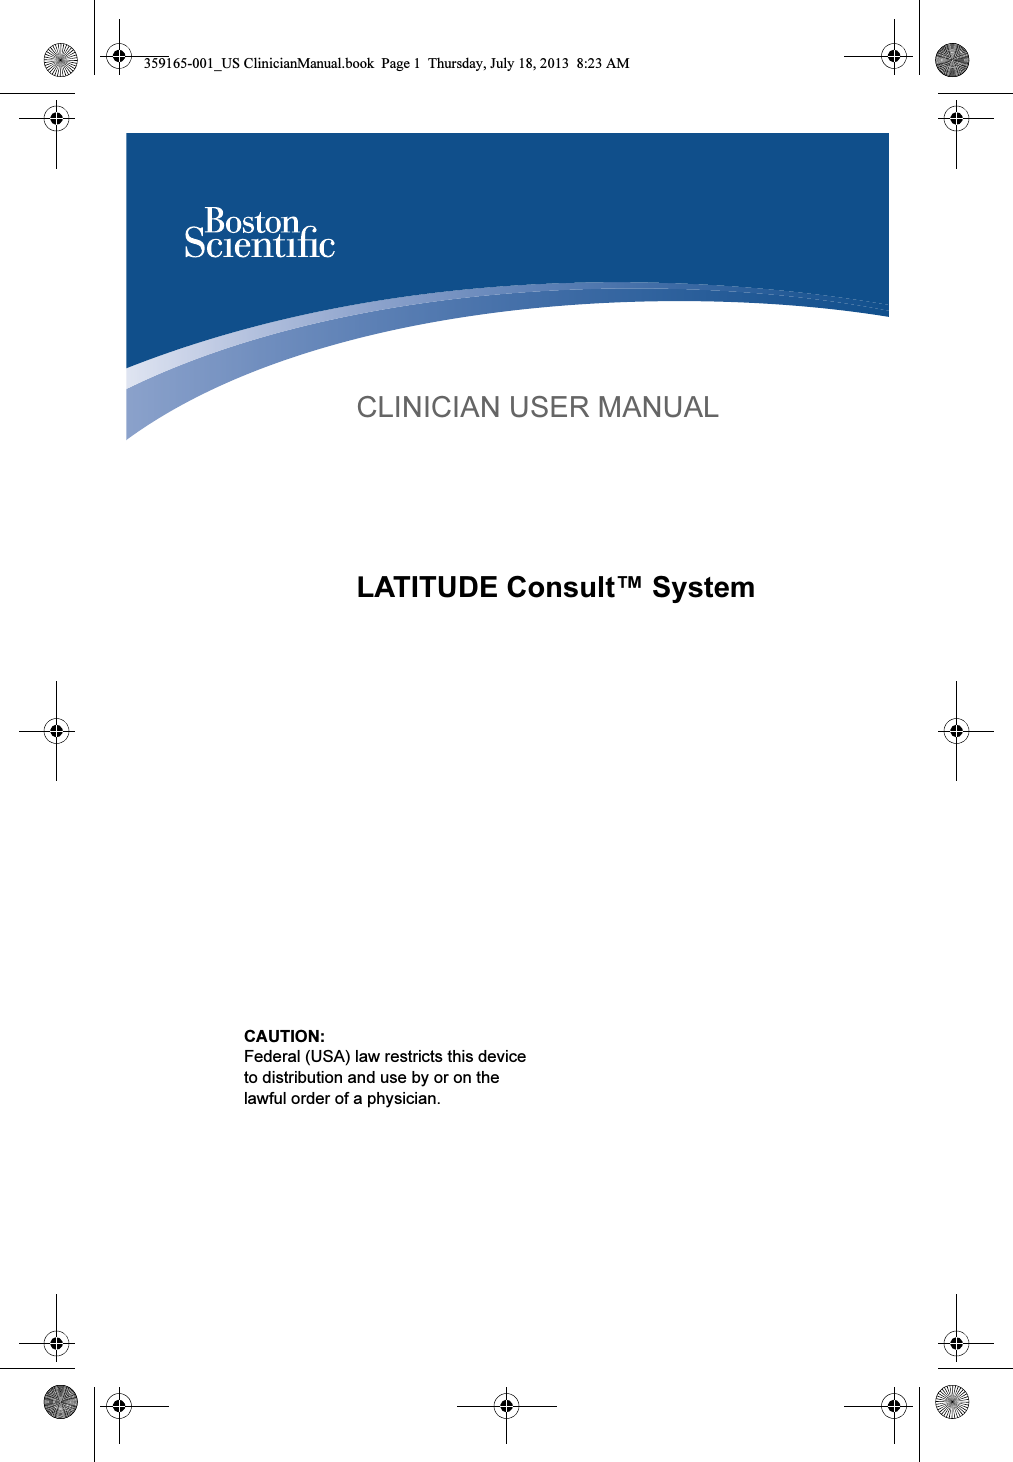 LATITUDE Consult™ SystemCLINICIAN USER MANUALCAUTION: Federal (USA) law restricts this device to distribution and use by or on the lawful order of a physician.359165-001_US ClinicianManual.book  Page 1  Thursday, July 18, 2013  8:23 AM